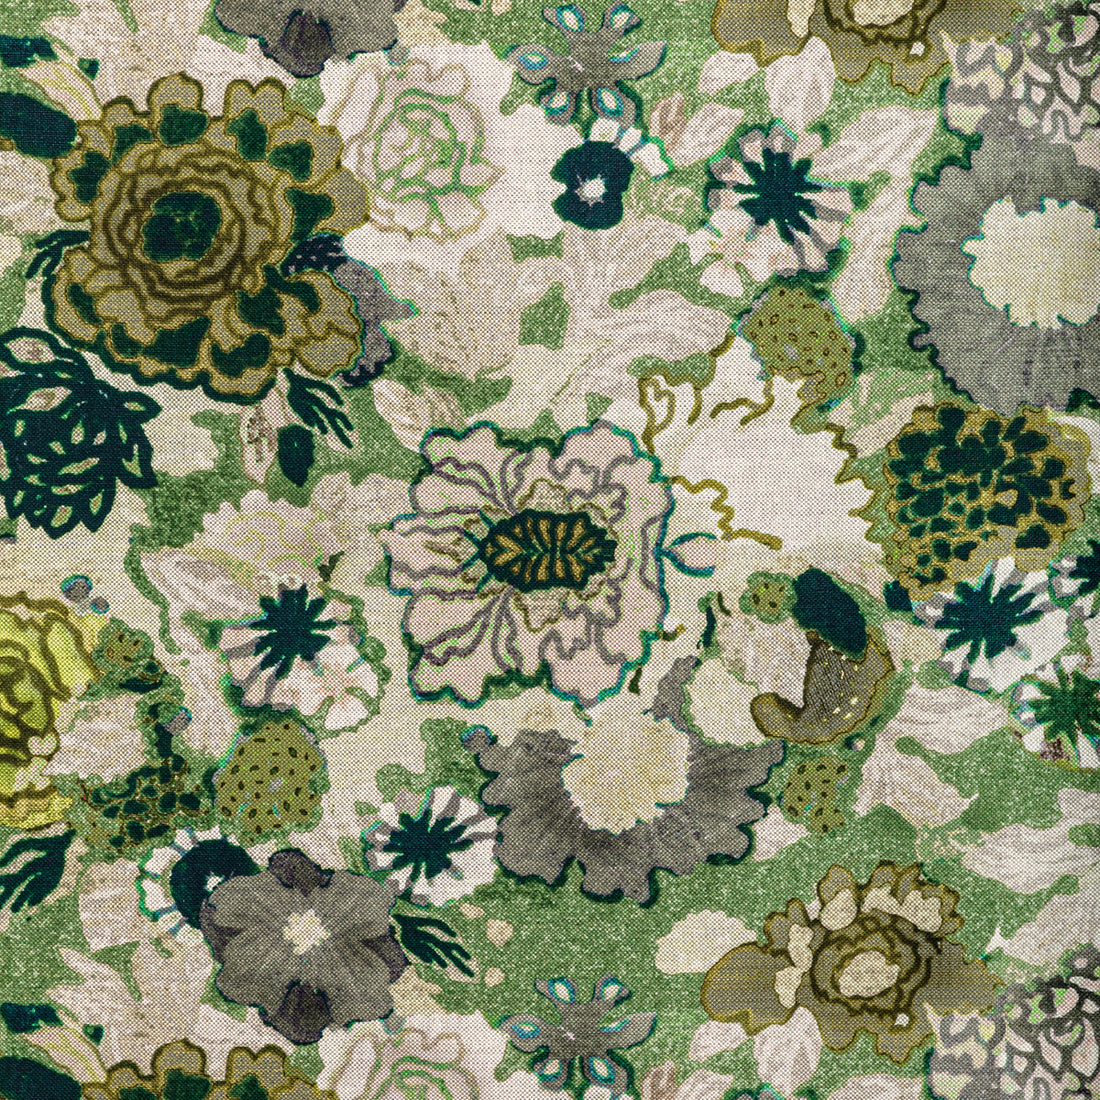 Arioso Print fabric in stone/jade color - pattern GWF-3774.311.0 - by Lee Jofa Modern in the Rhapsody collection